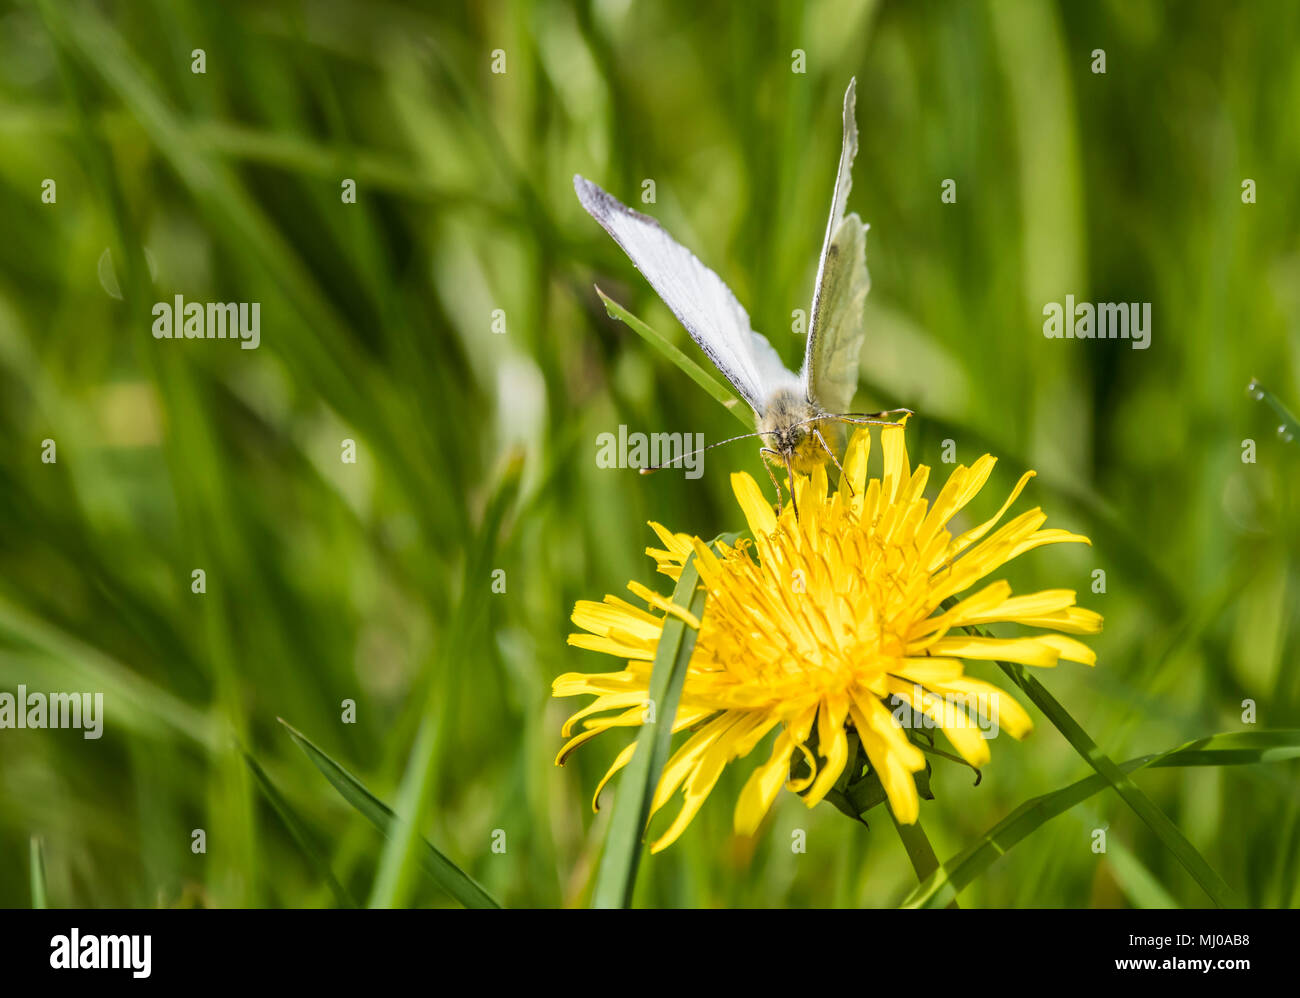 Green-Veined White butterfly (Pieris napi) on a Common Dandelion (Taraxacum officinale) flower head in late Spring in West Sussex, England, UK. Stock Photo